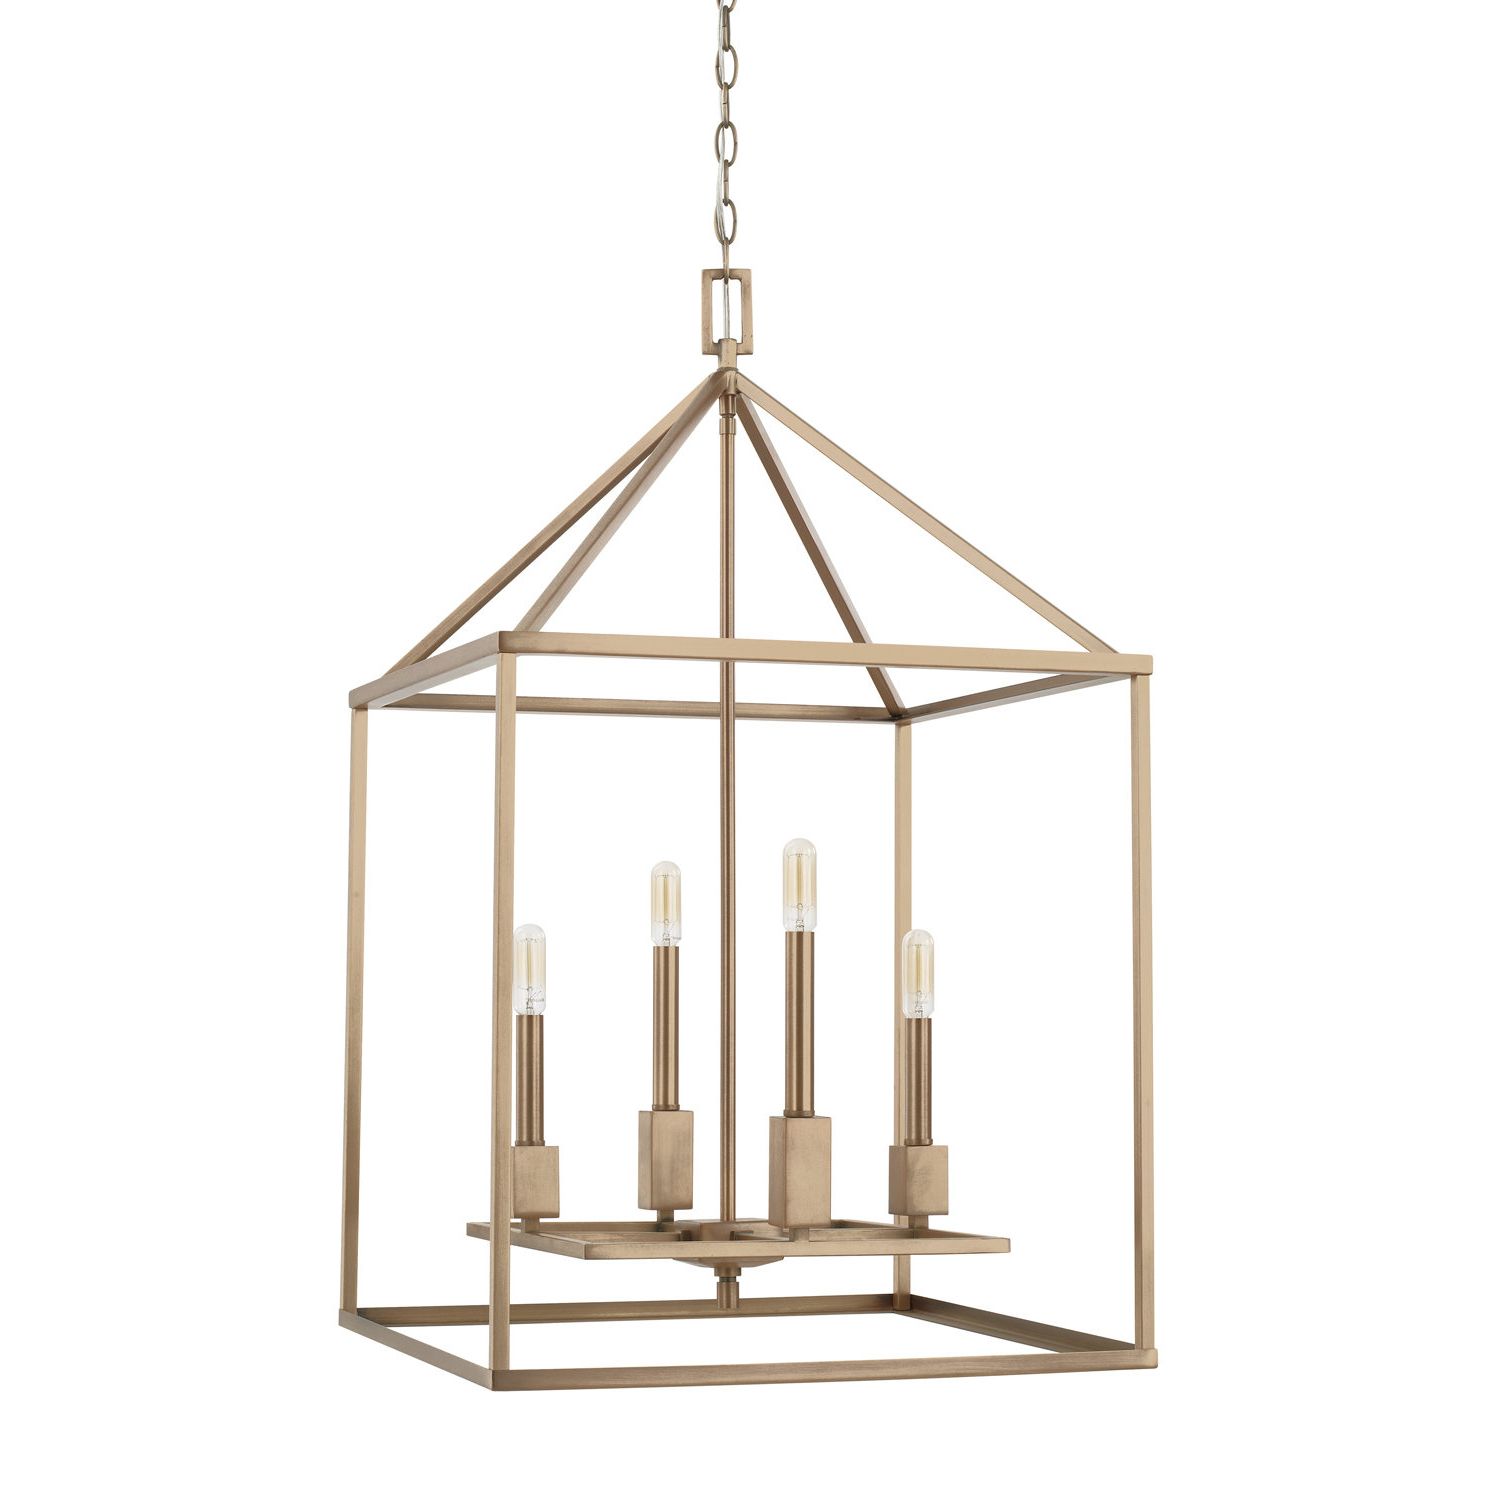 William 4 Light Lantern Square / Rectangle Pendants With Favorite Baptista 4 Light Square/rectangle Chandelier (View 18 of 25)